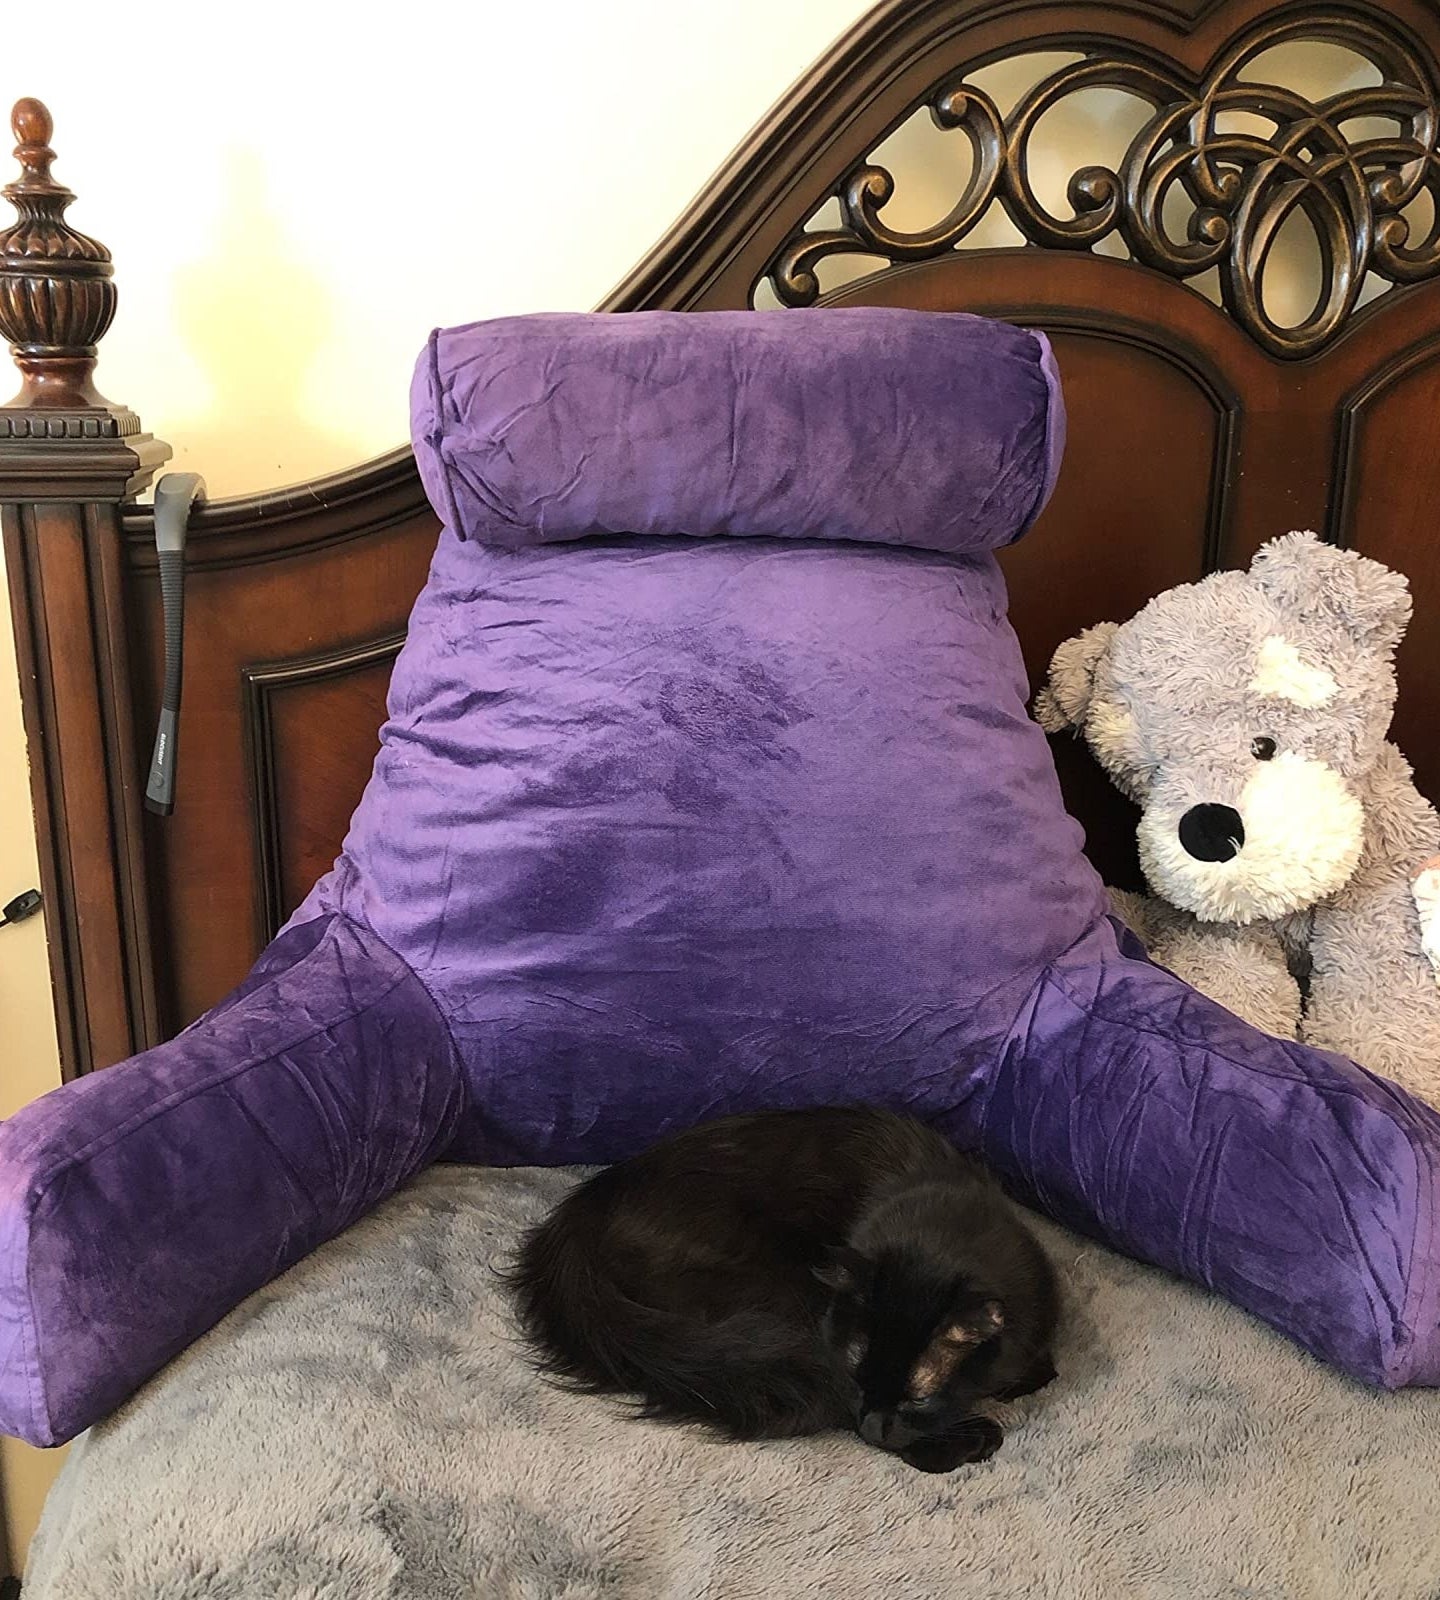 reviewer image of purple backrest pillow on a bed